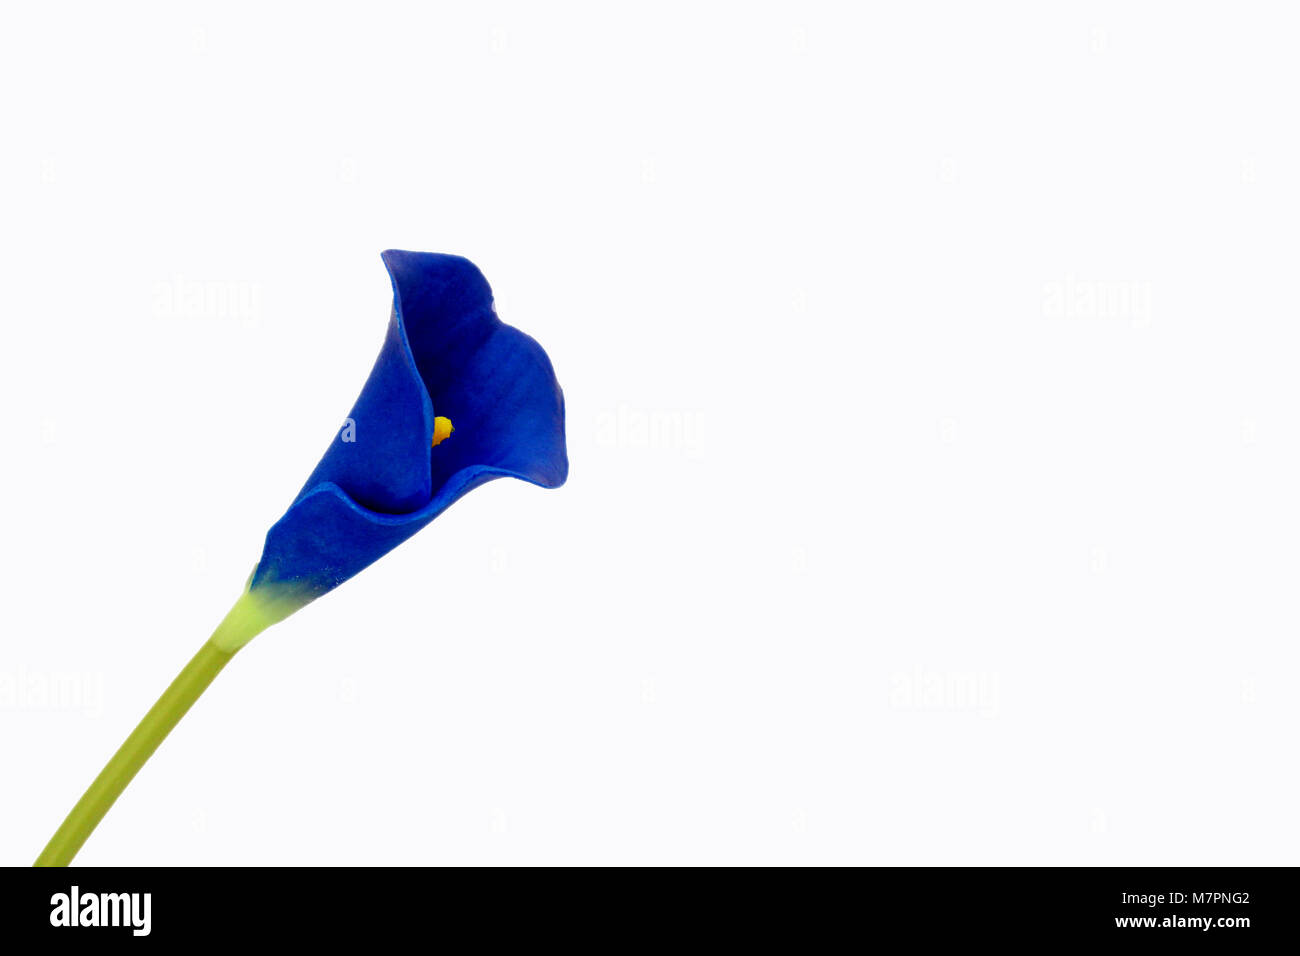 Blue flower with yellow inside green stim with copy space to the right. Stock Photo